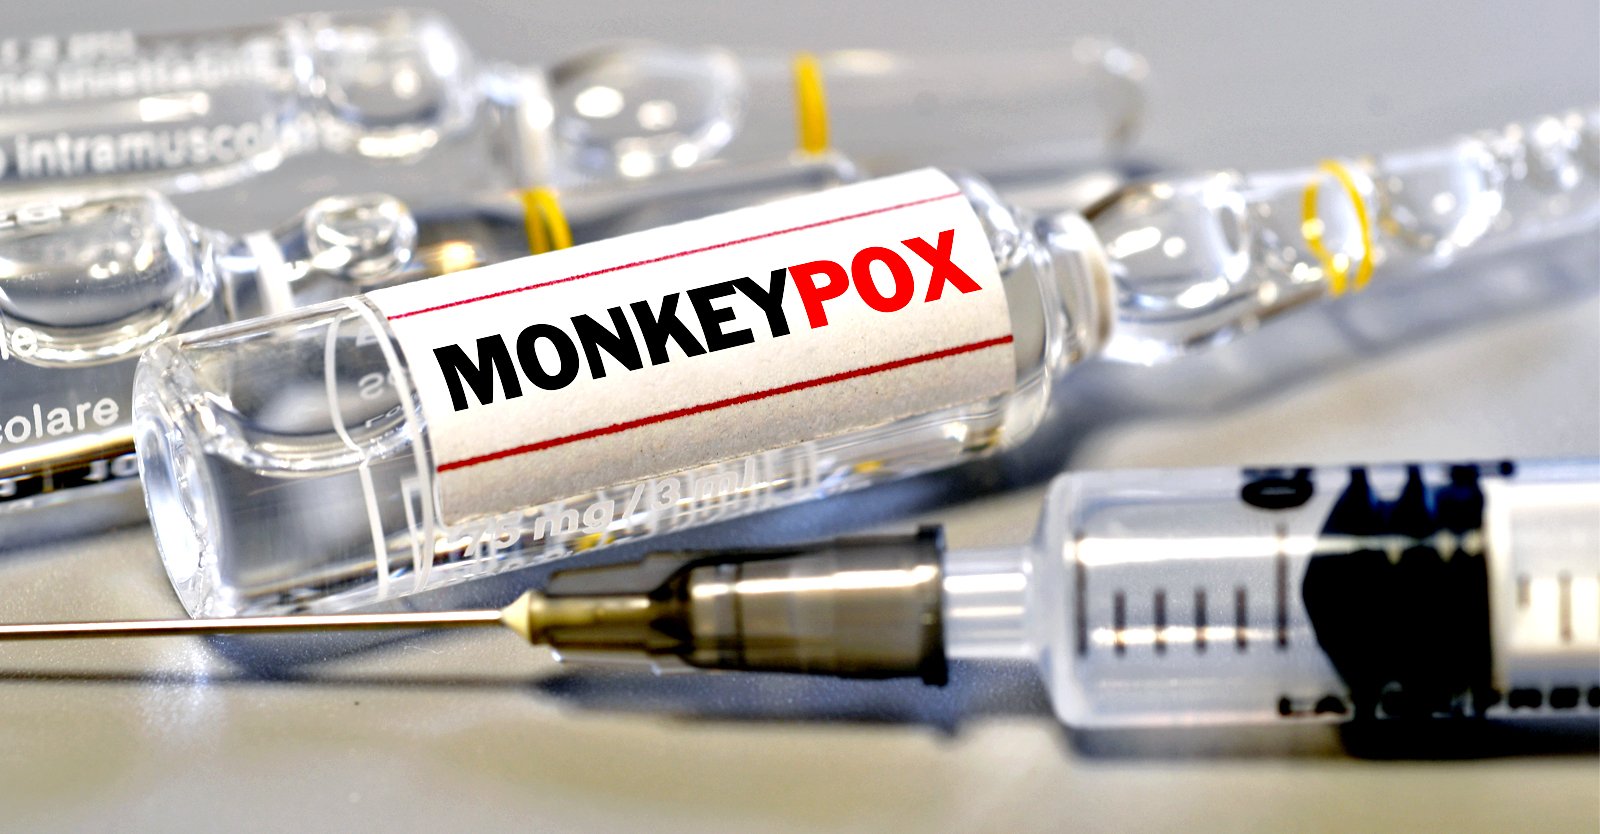 Monkeypox Vaccination Criteria Expanded by the FDA to Cover “High-Risk” Kids… WTF?